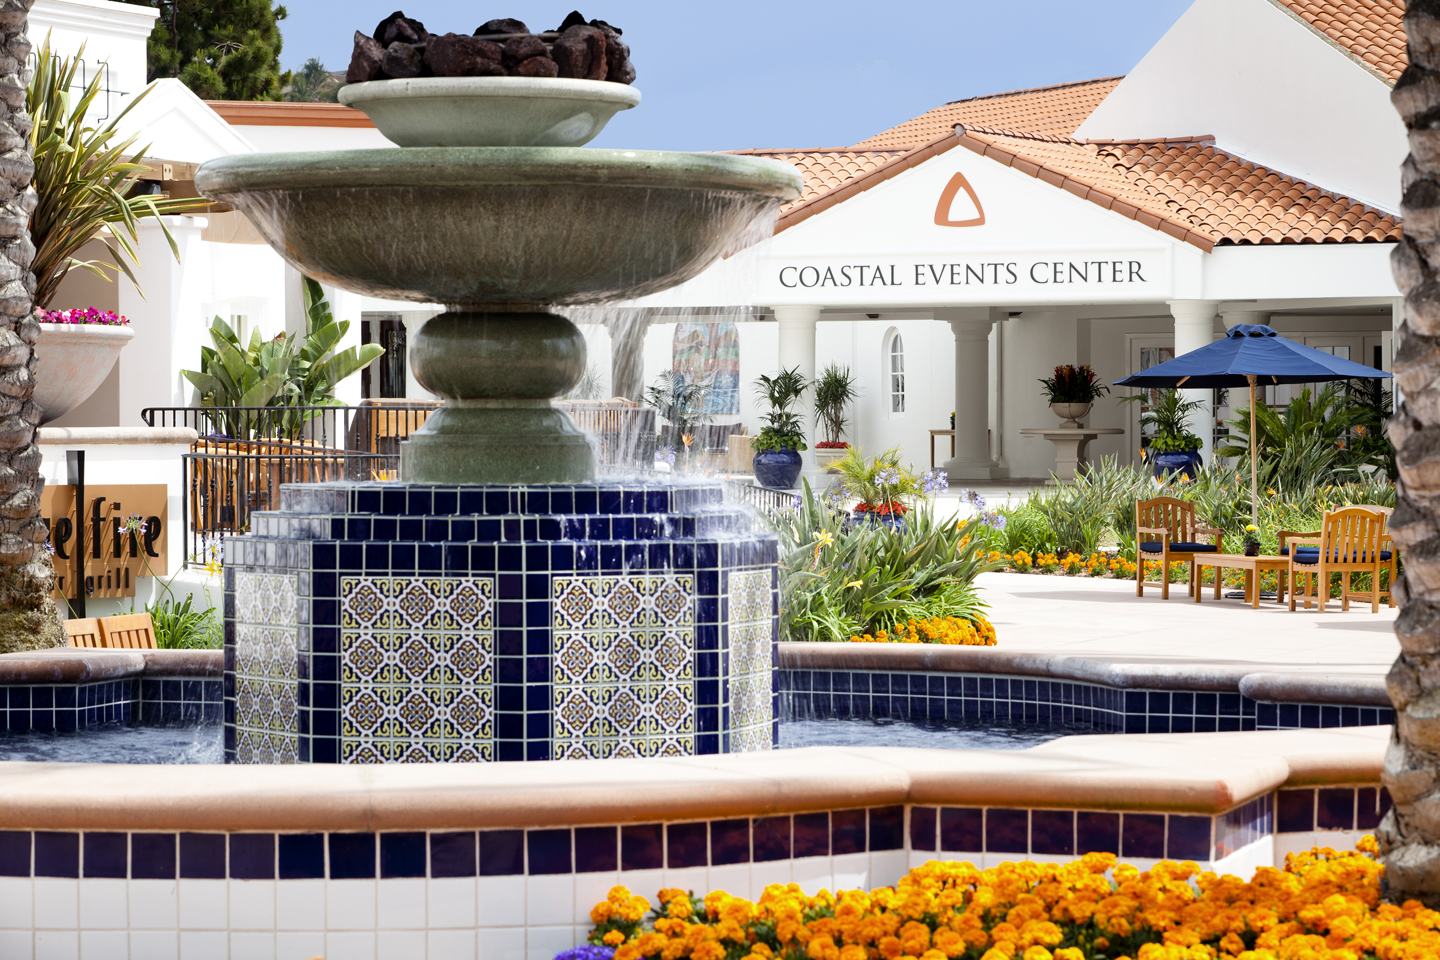 The Chopra Center for Wellbeing, located at Omni La Costa Resort